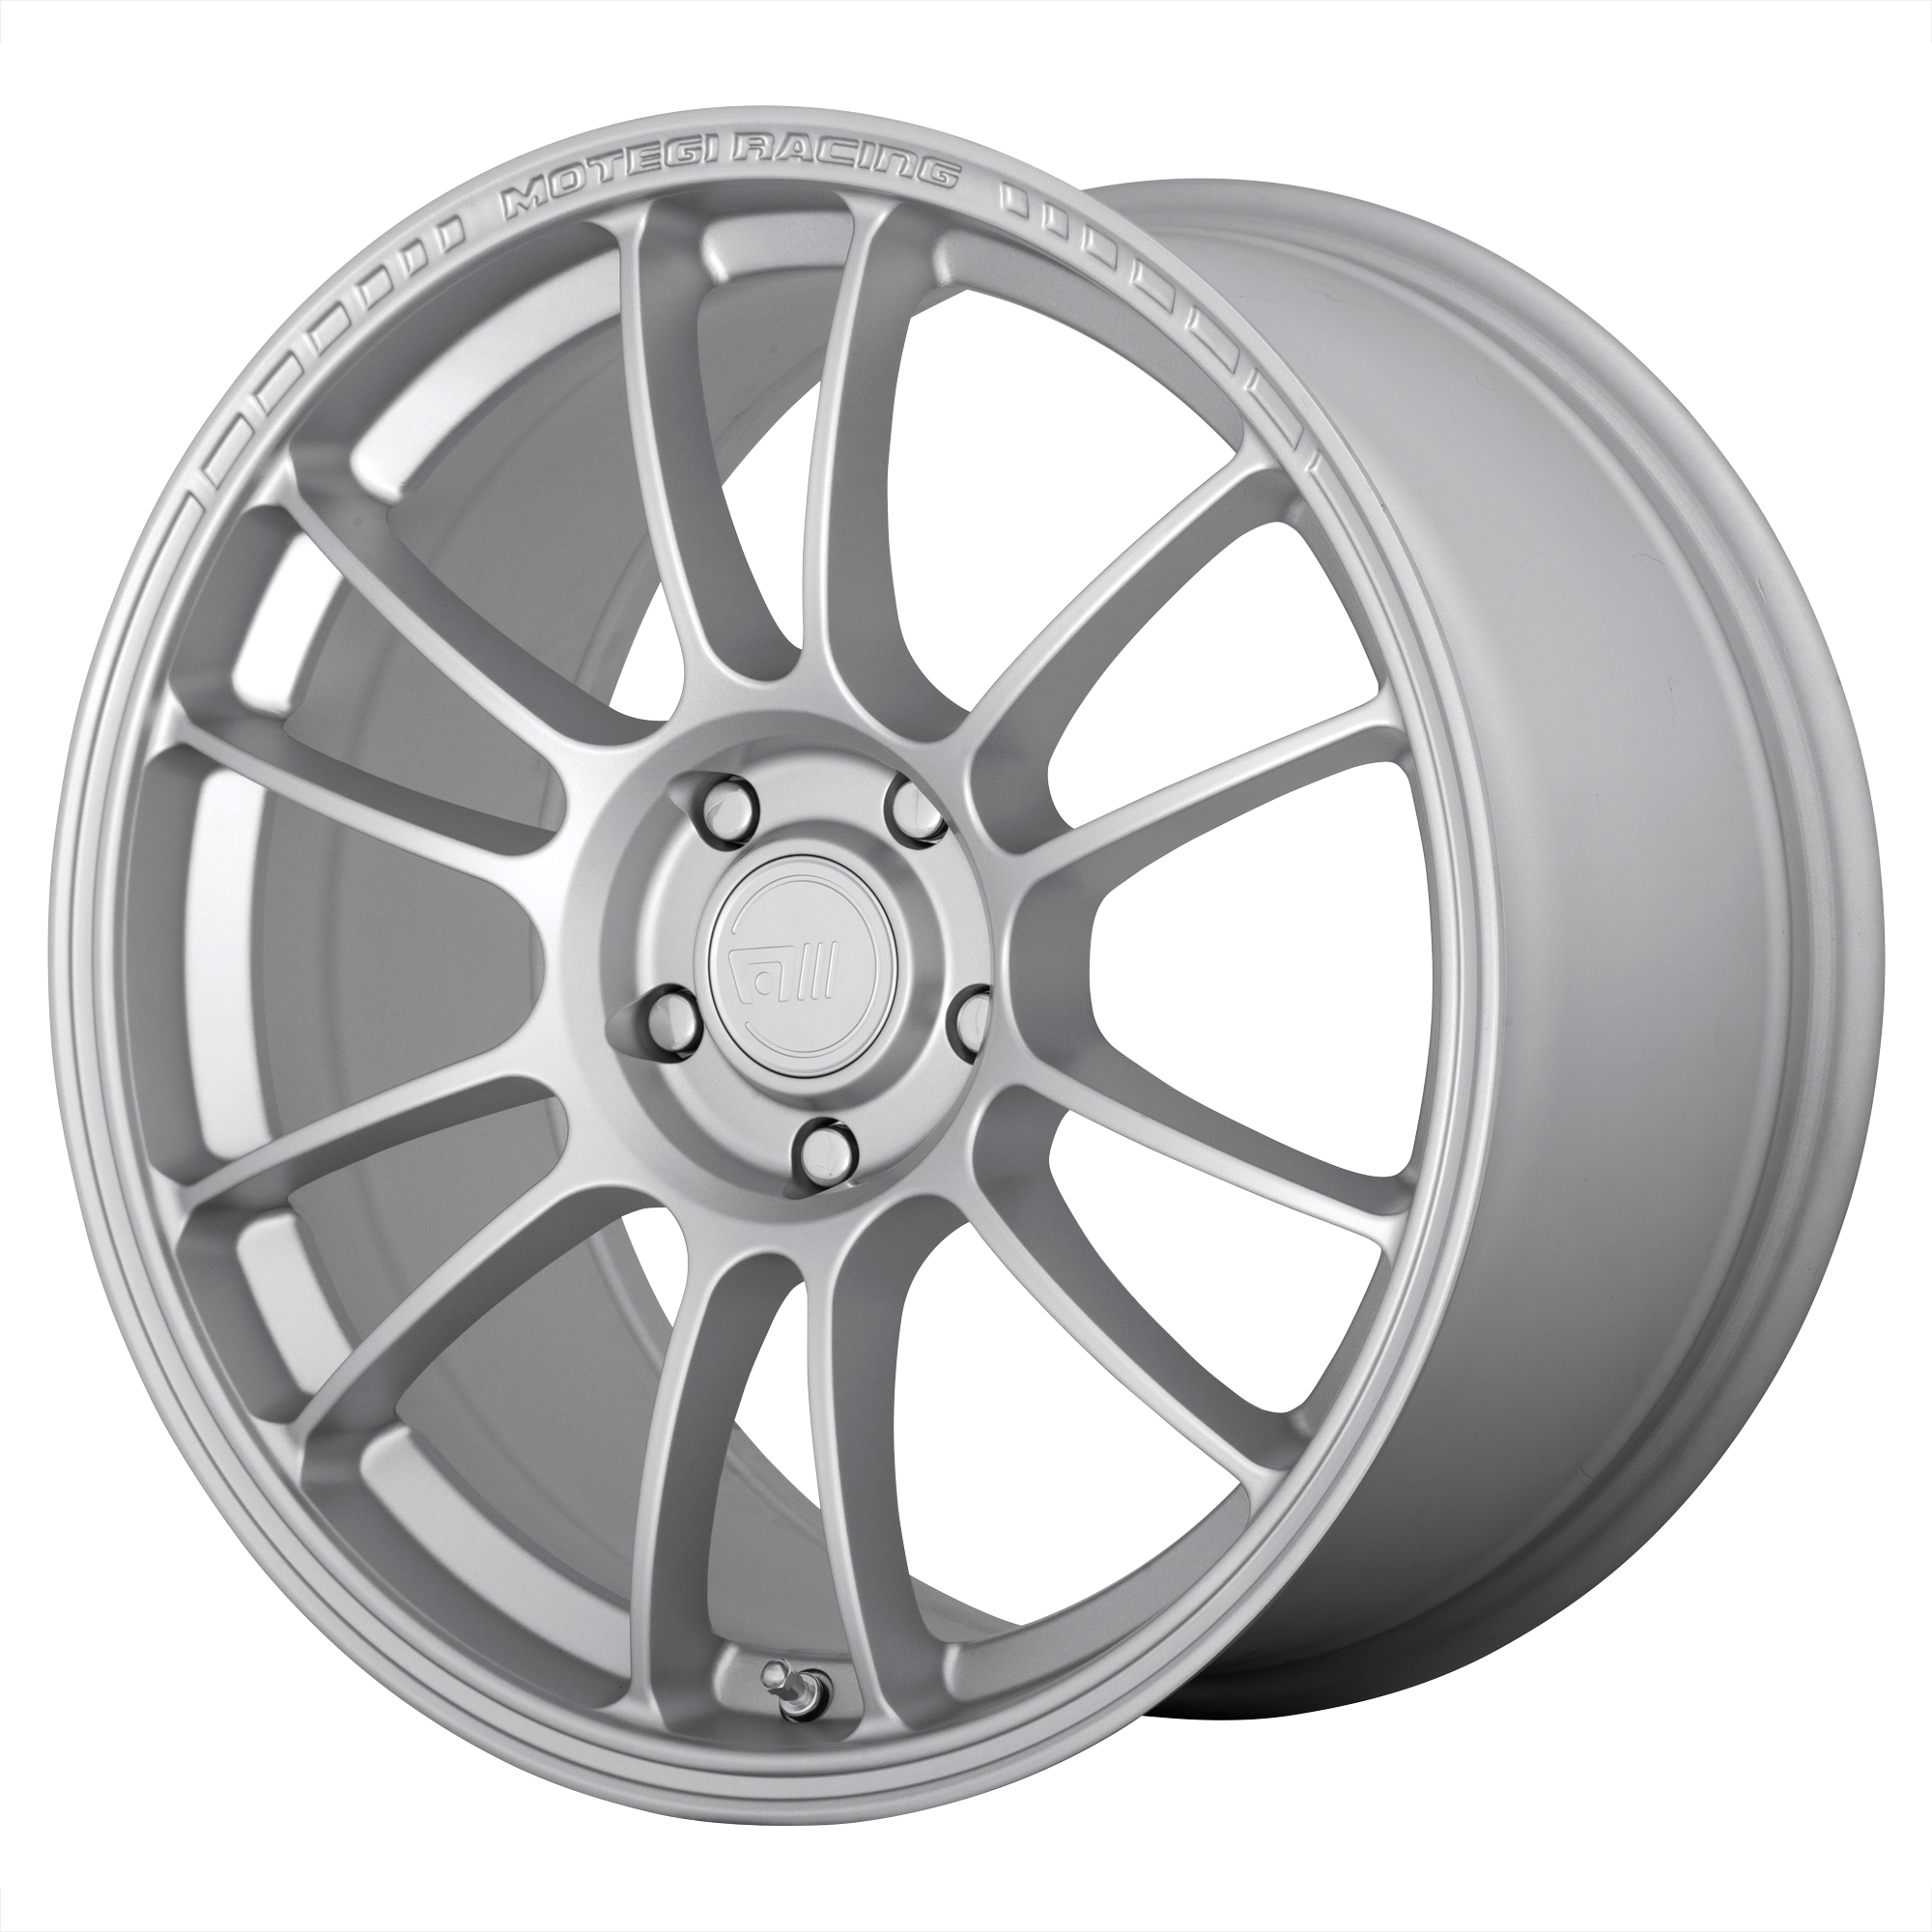 SS6 18x8.5 5x114.30 HYPER SILVER (35 mm) - Tires and Engine Performance